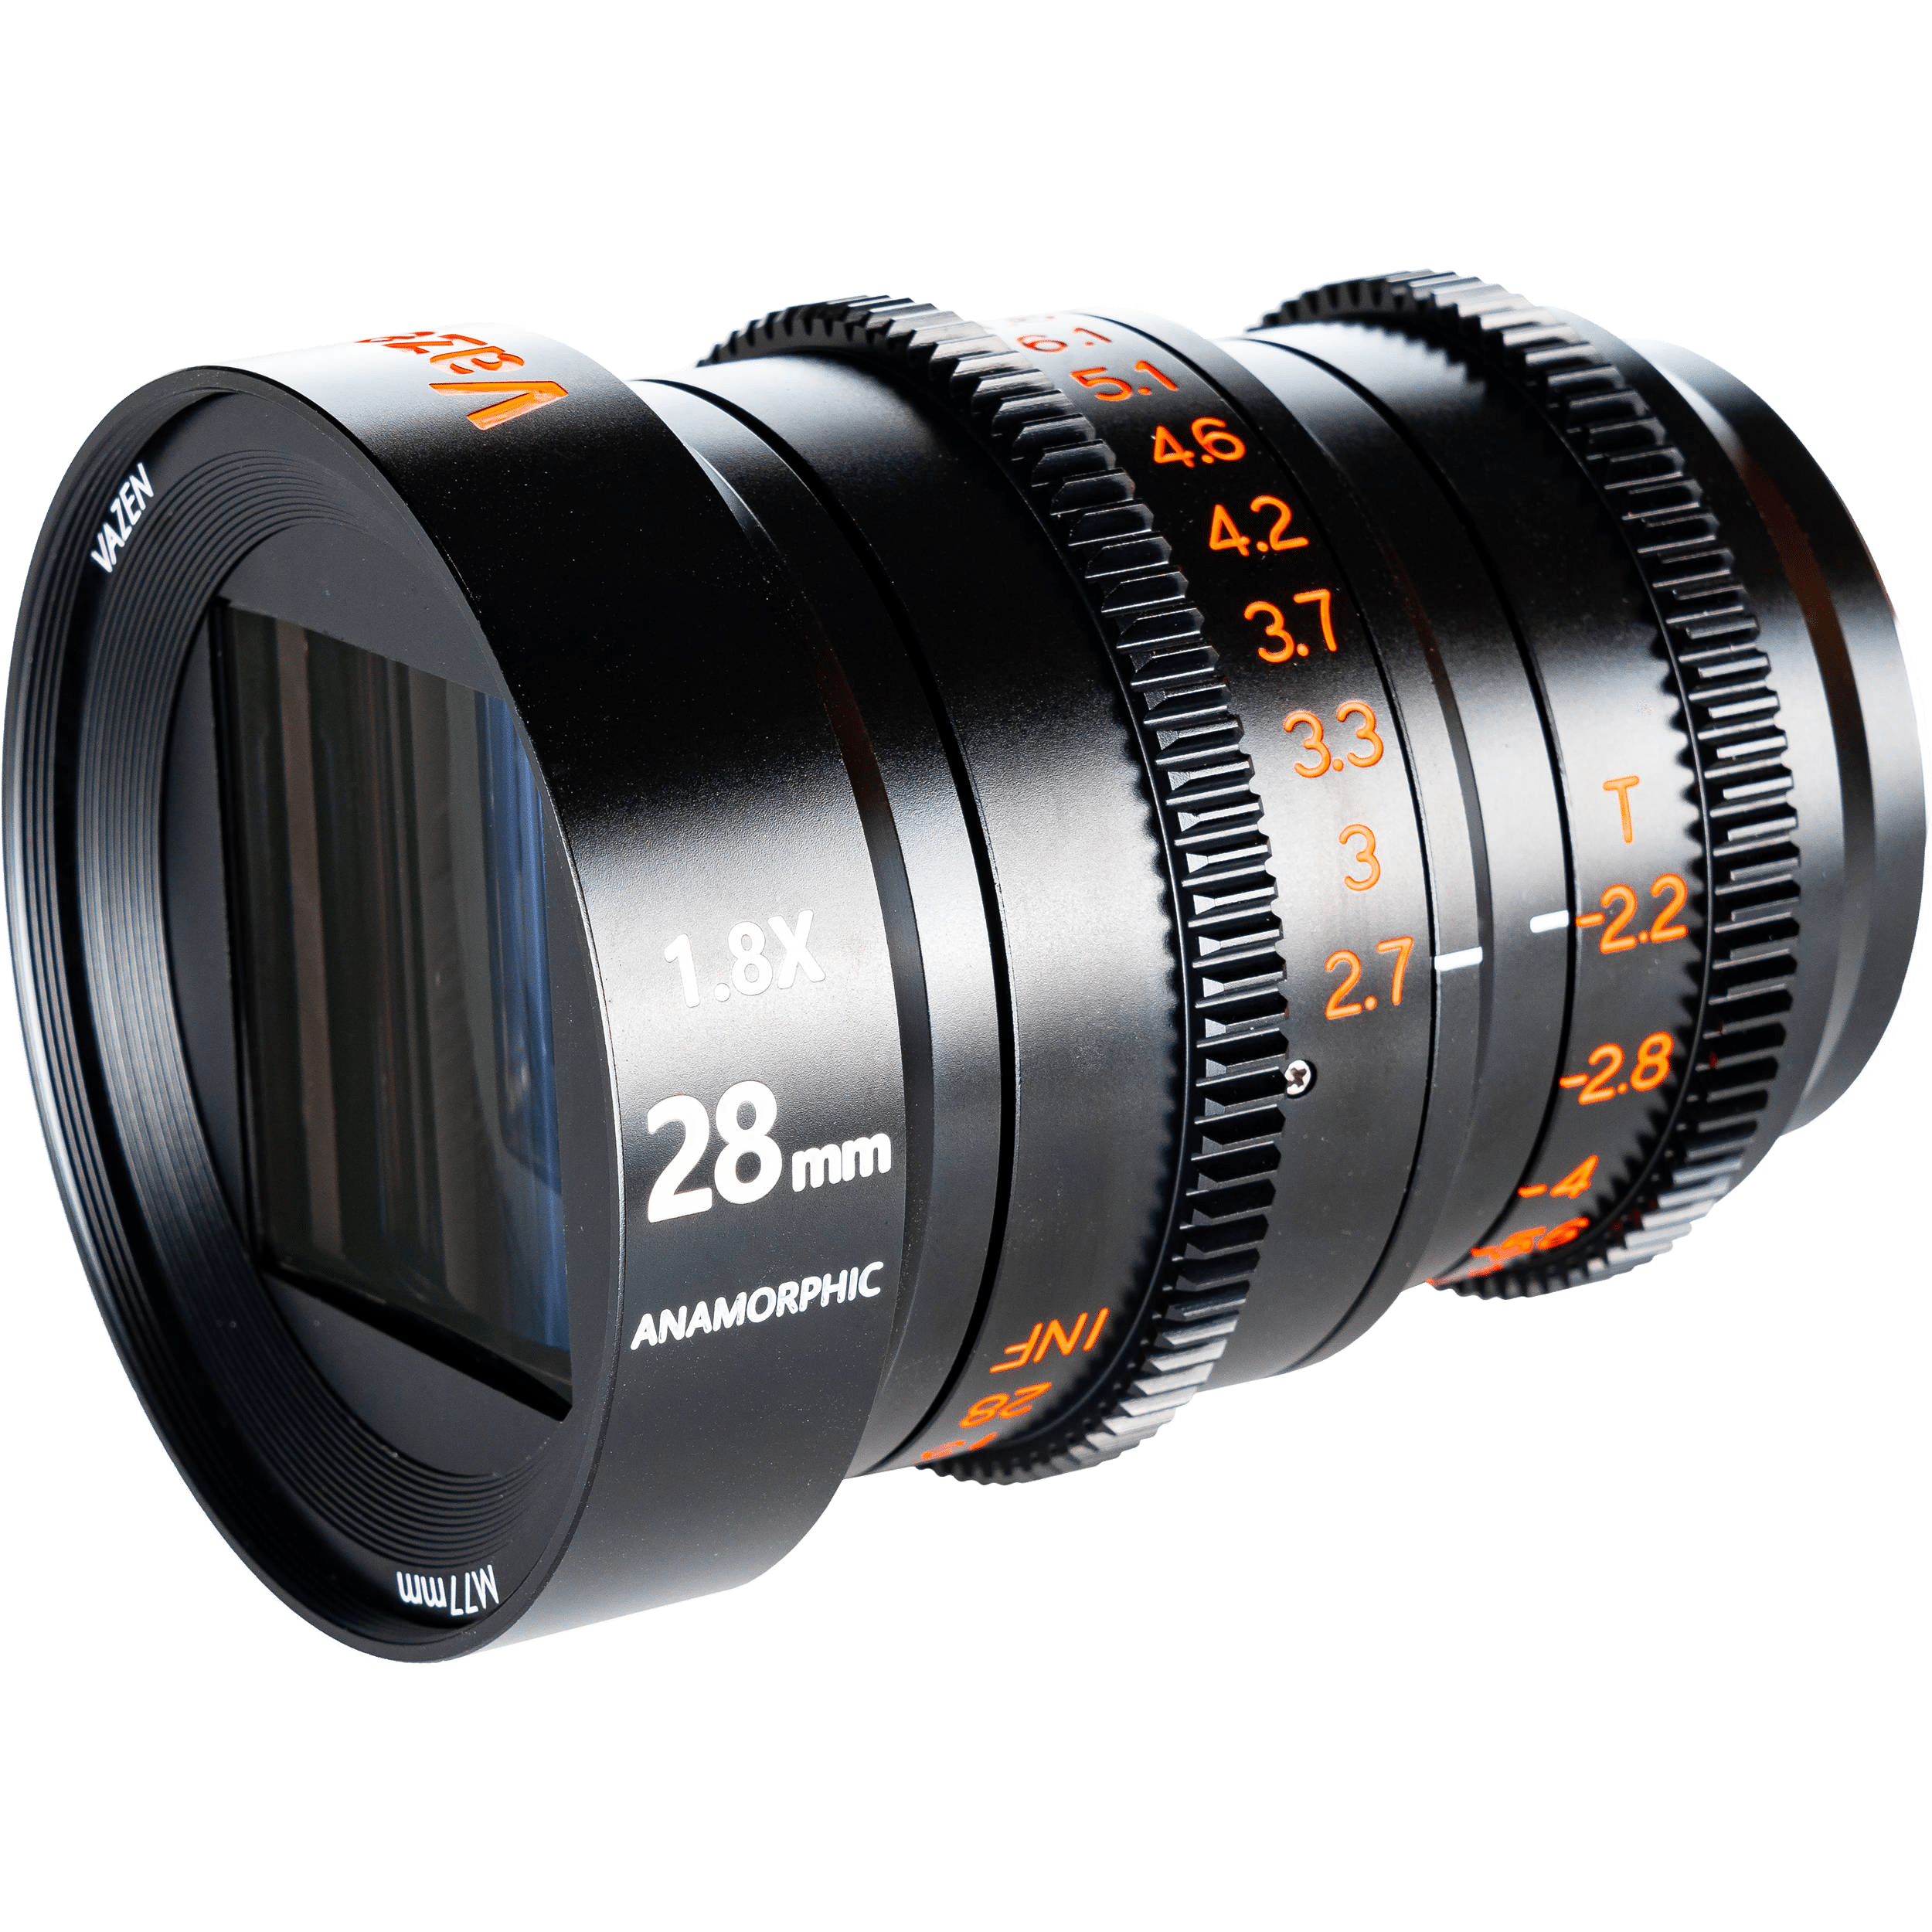 Vazen 28mm T/2.2 1.8X Anamorphic Lens for Canon RF Camera in a Front-Side View